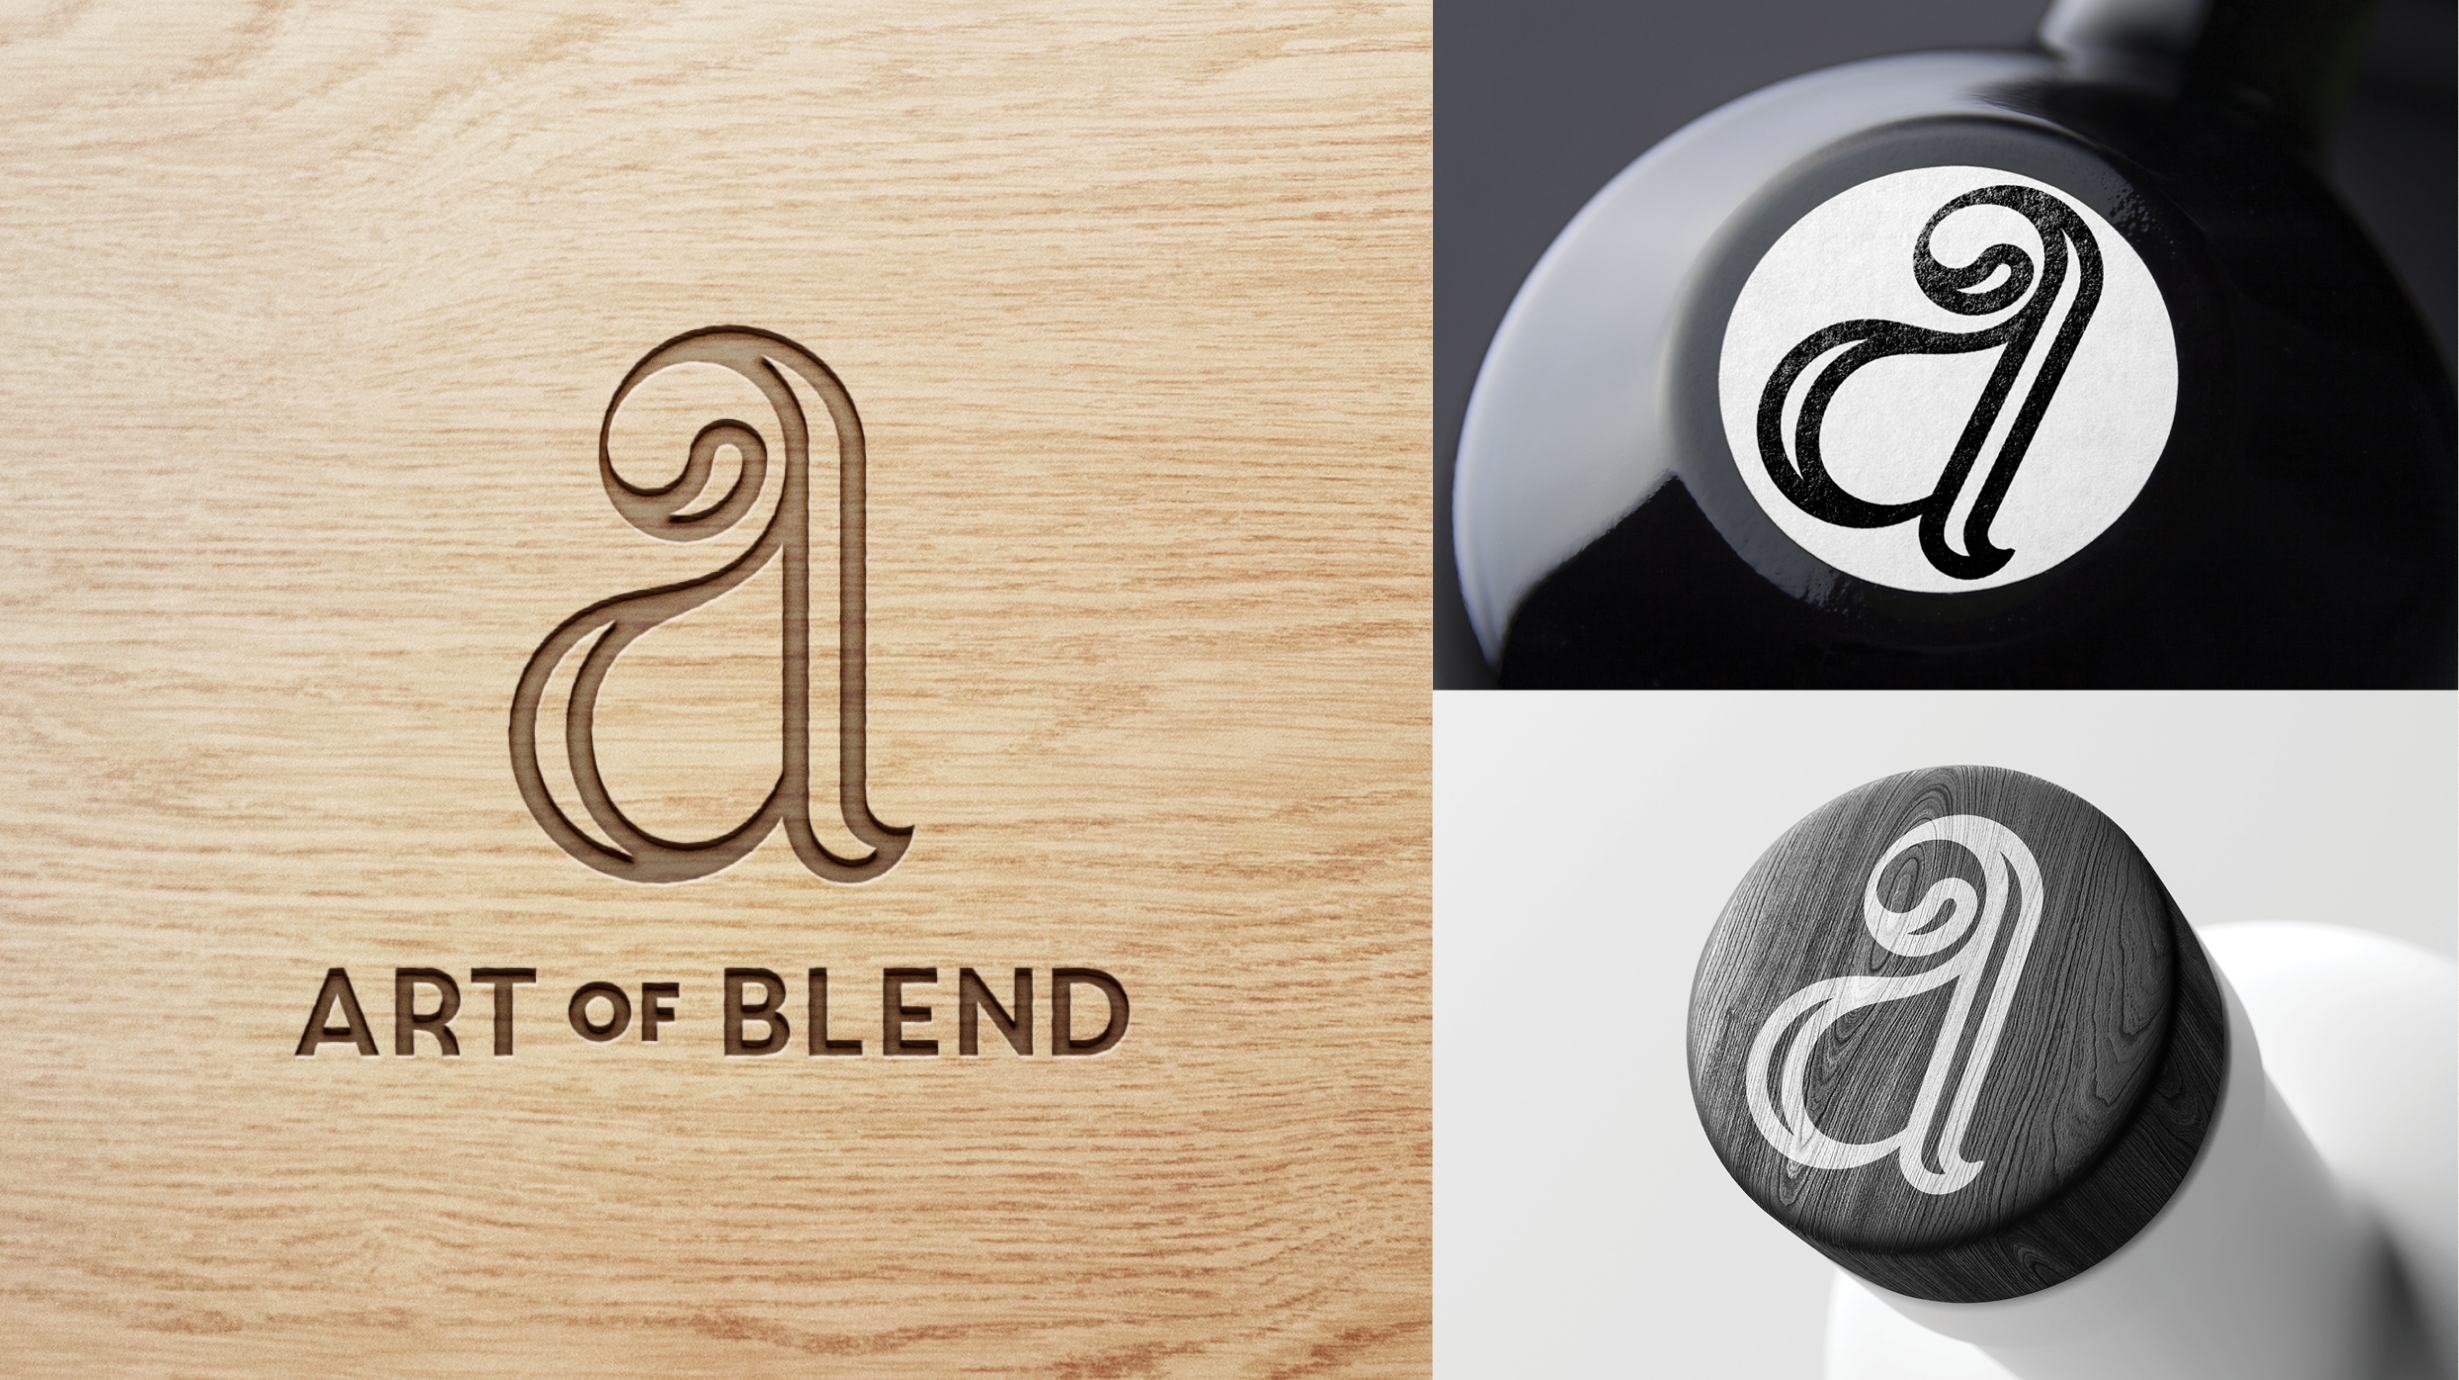 Three Art of Blend logos applied on different surfaces, showcasing the brand refresh work Brother and Co has done.